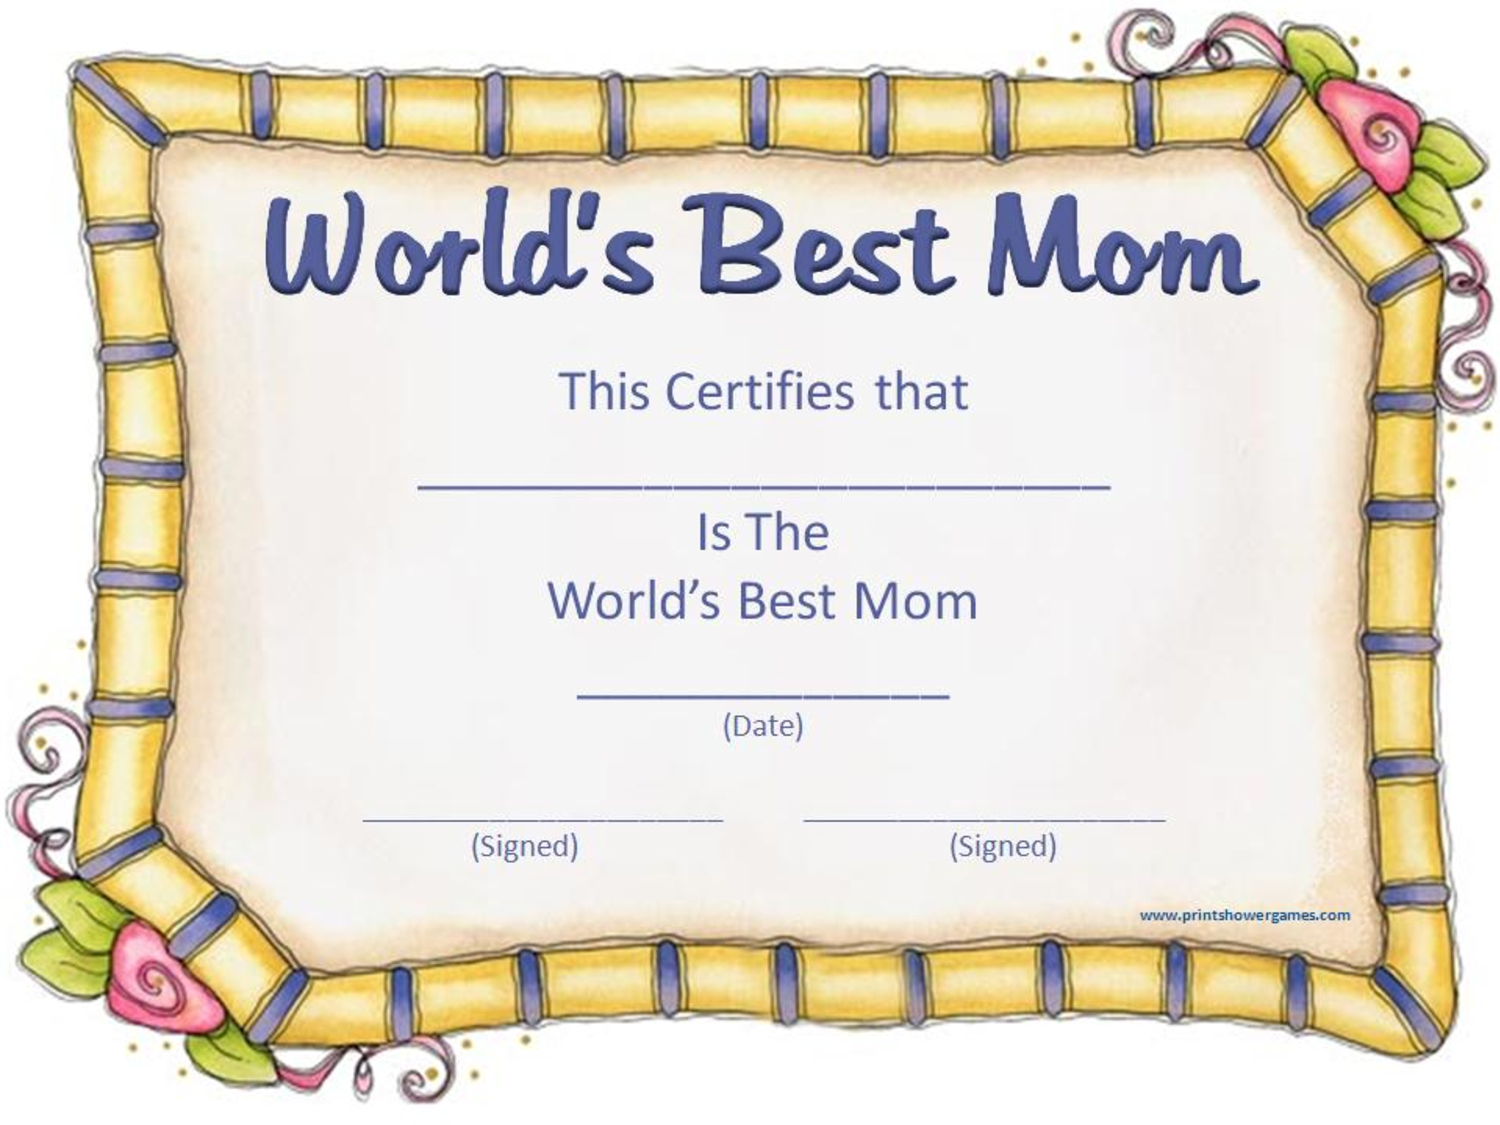 Mother's Day Certificates Let's Celebrate!